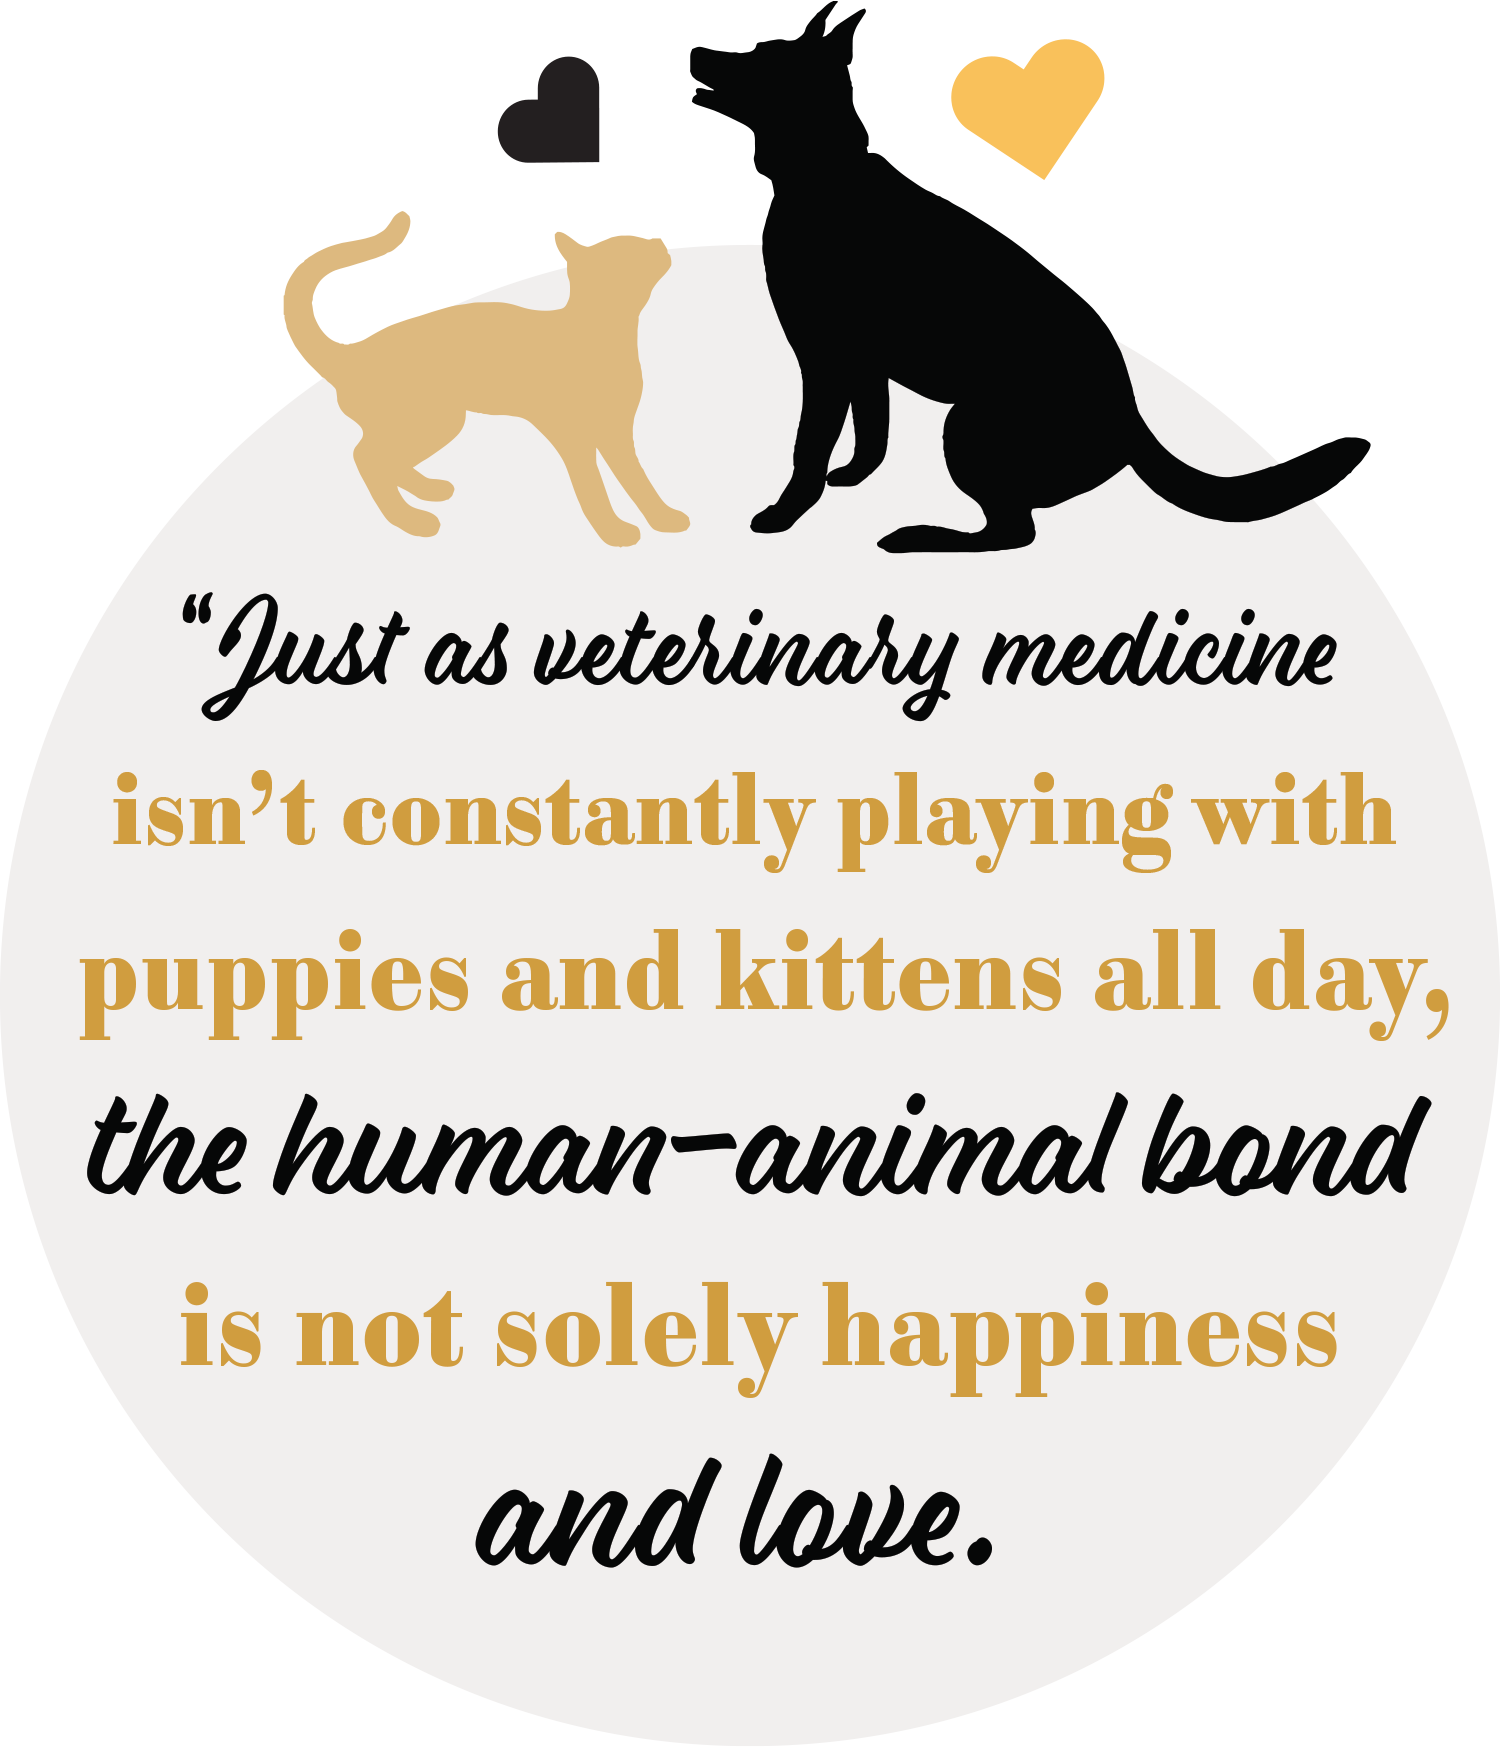 "Just as veterinary medicine isn't constantly playing with puppies and kittens all day, the human-animal bond is not soley happiness and love.